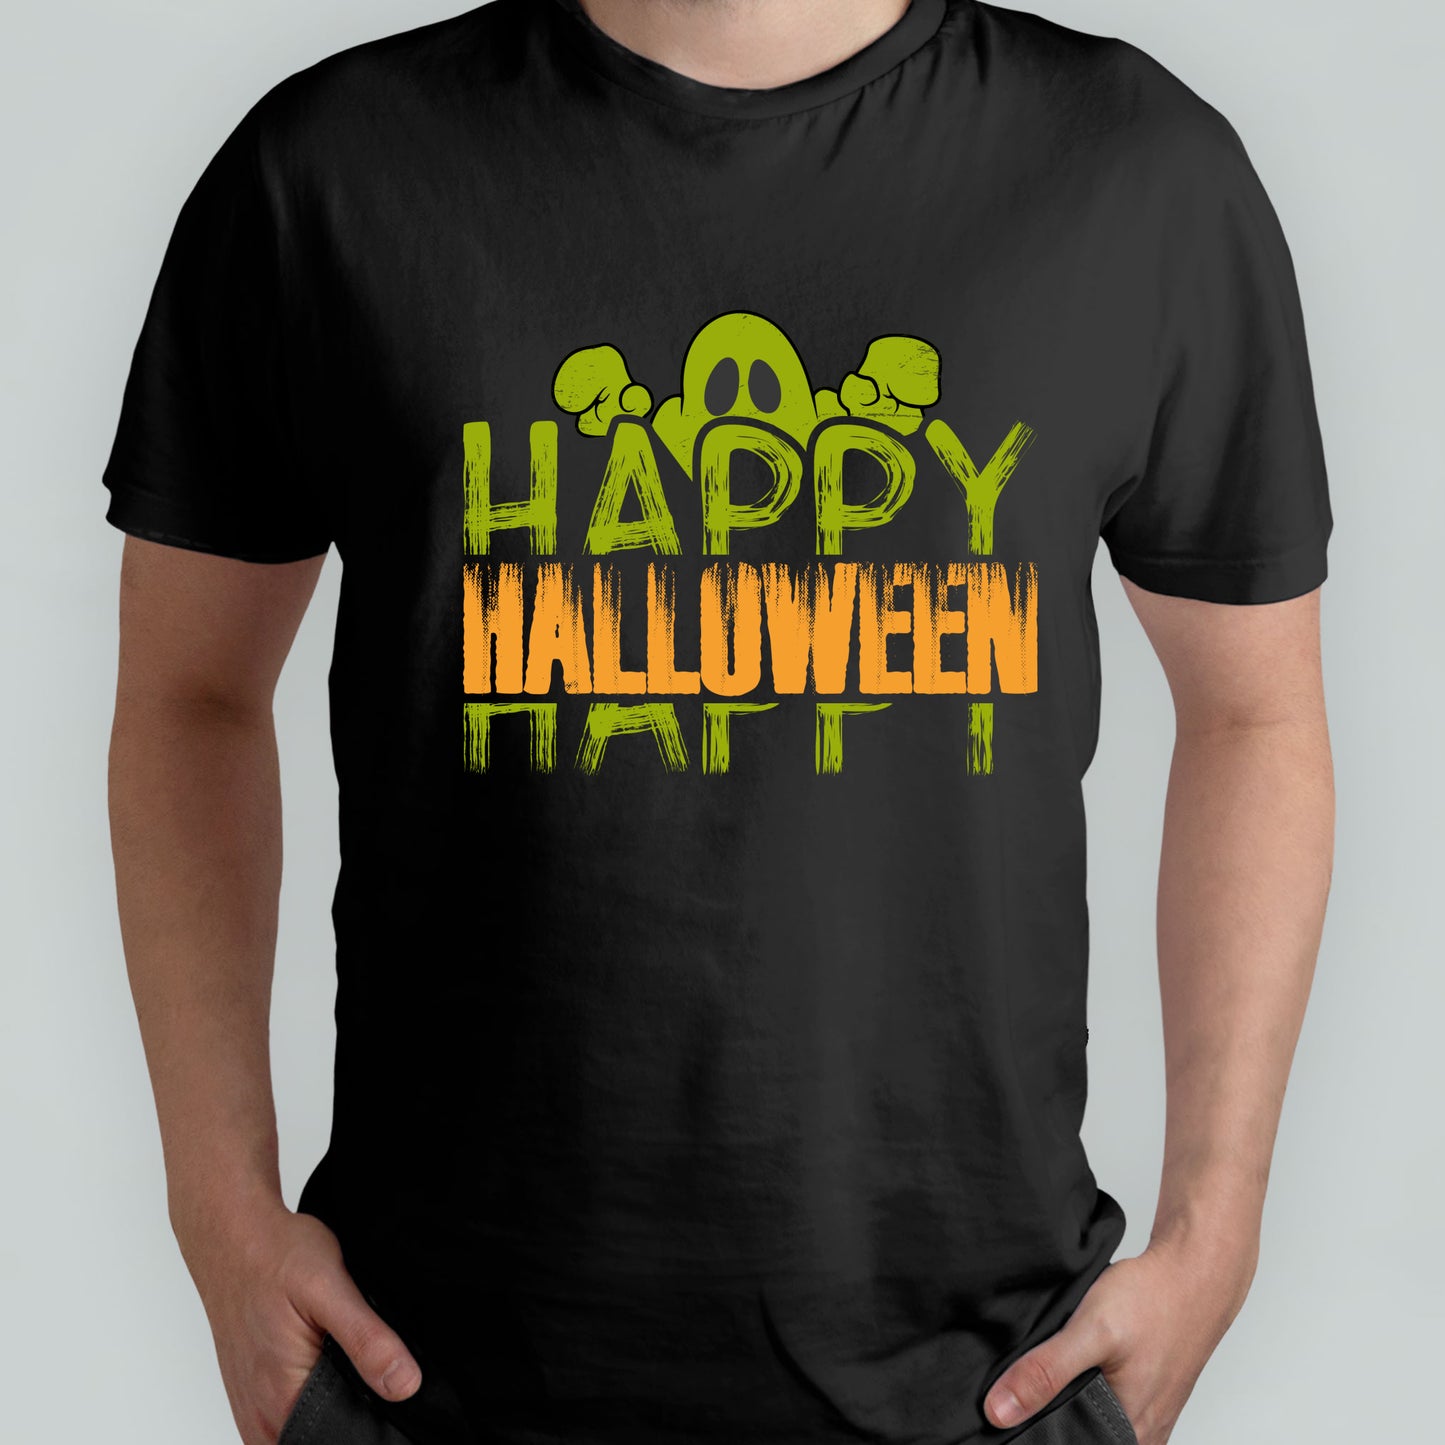 Ghost T-Shirt For Halloween T Shirt For Spooky TShirt For Trick Or Treating Shirt For All Hallows Eve Costume